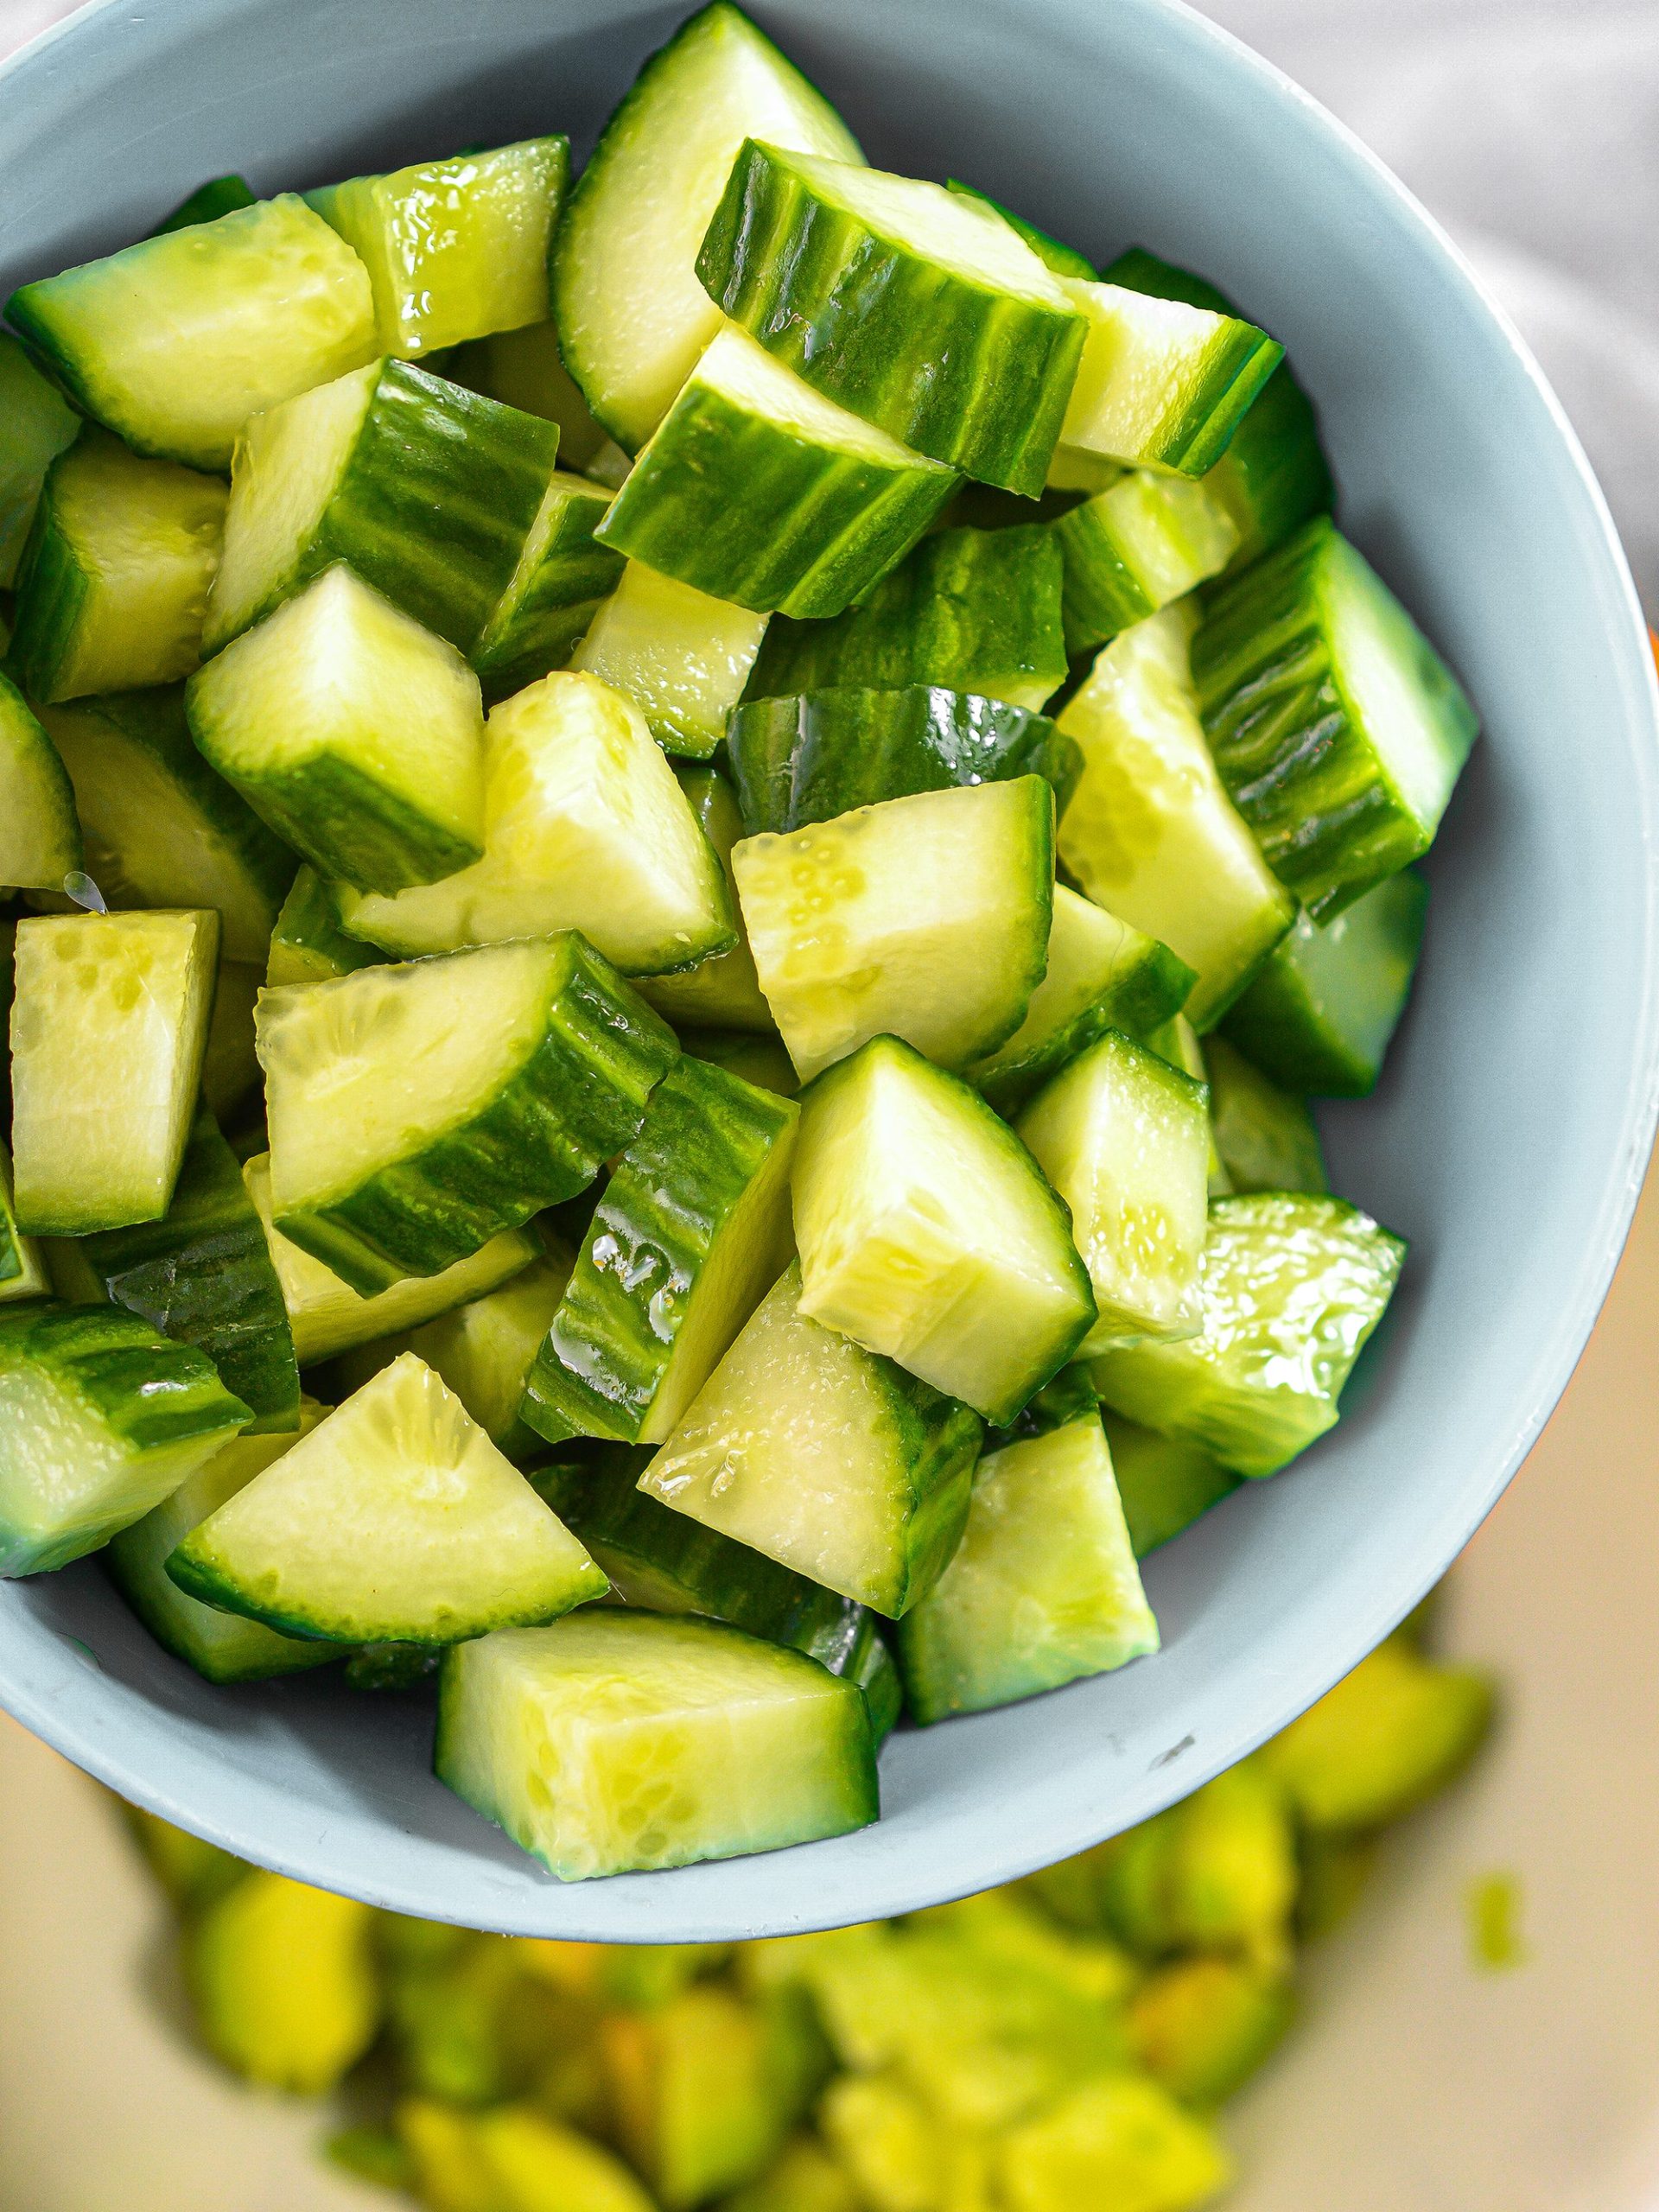 In a mixing bowl, stir together the cucumber, avocado and tomato.